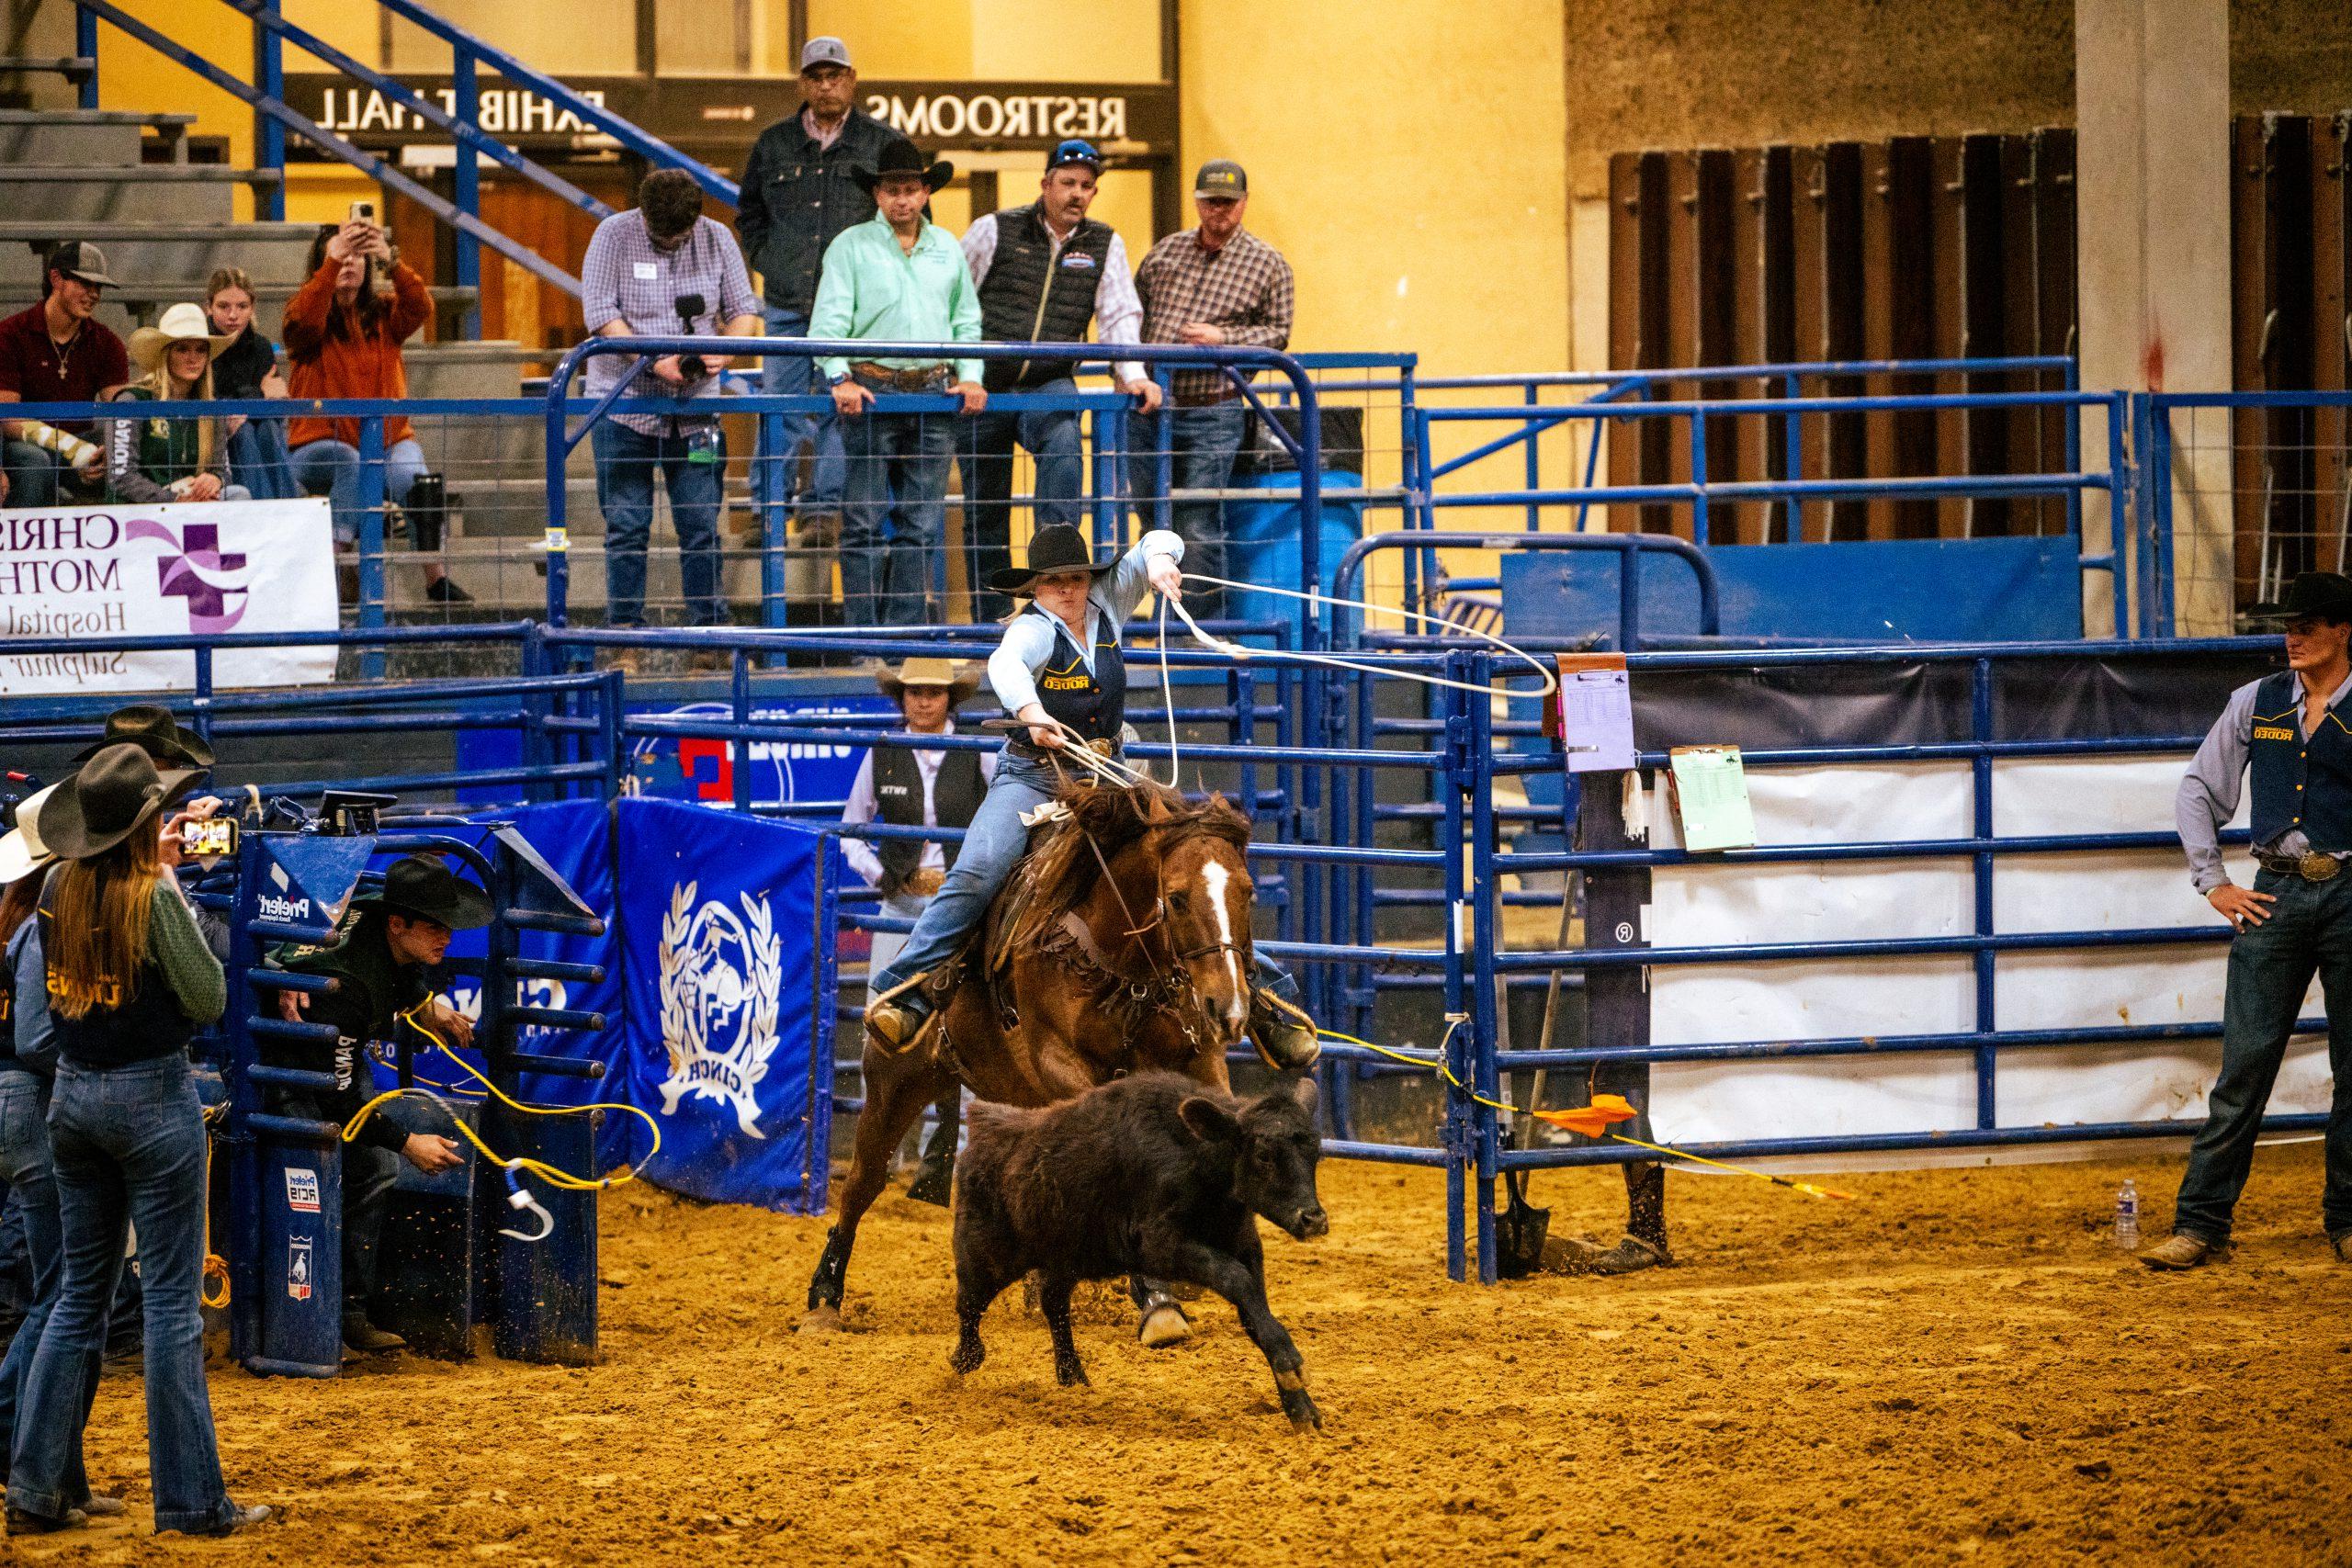 A male riding a horse at the rodeo.